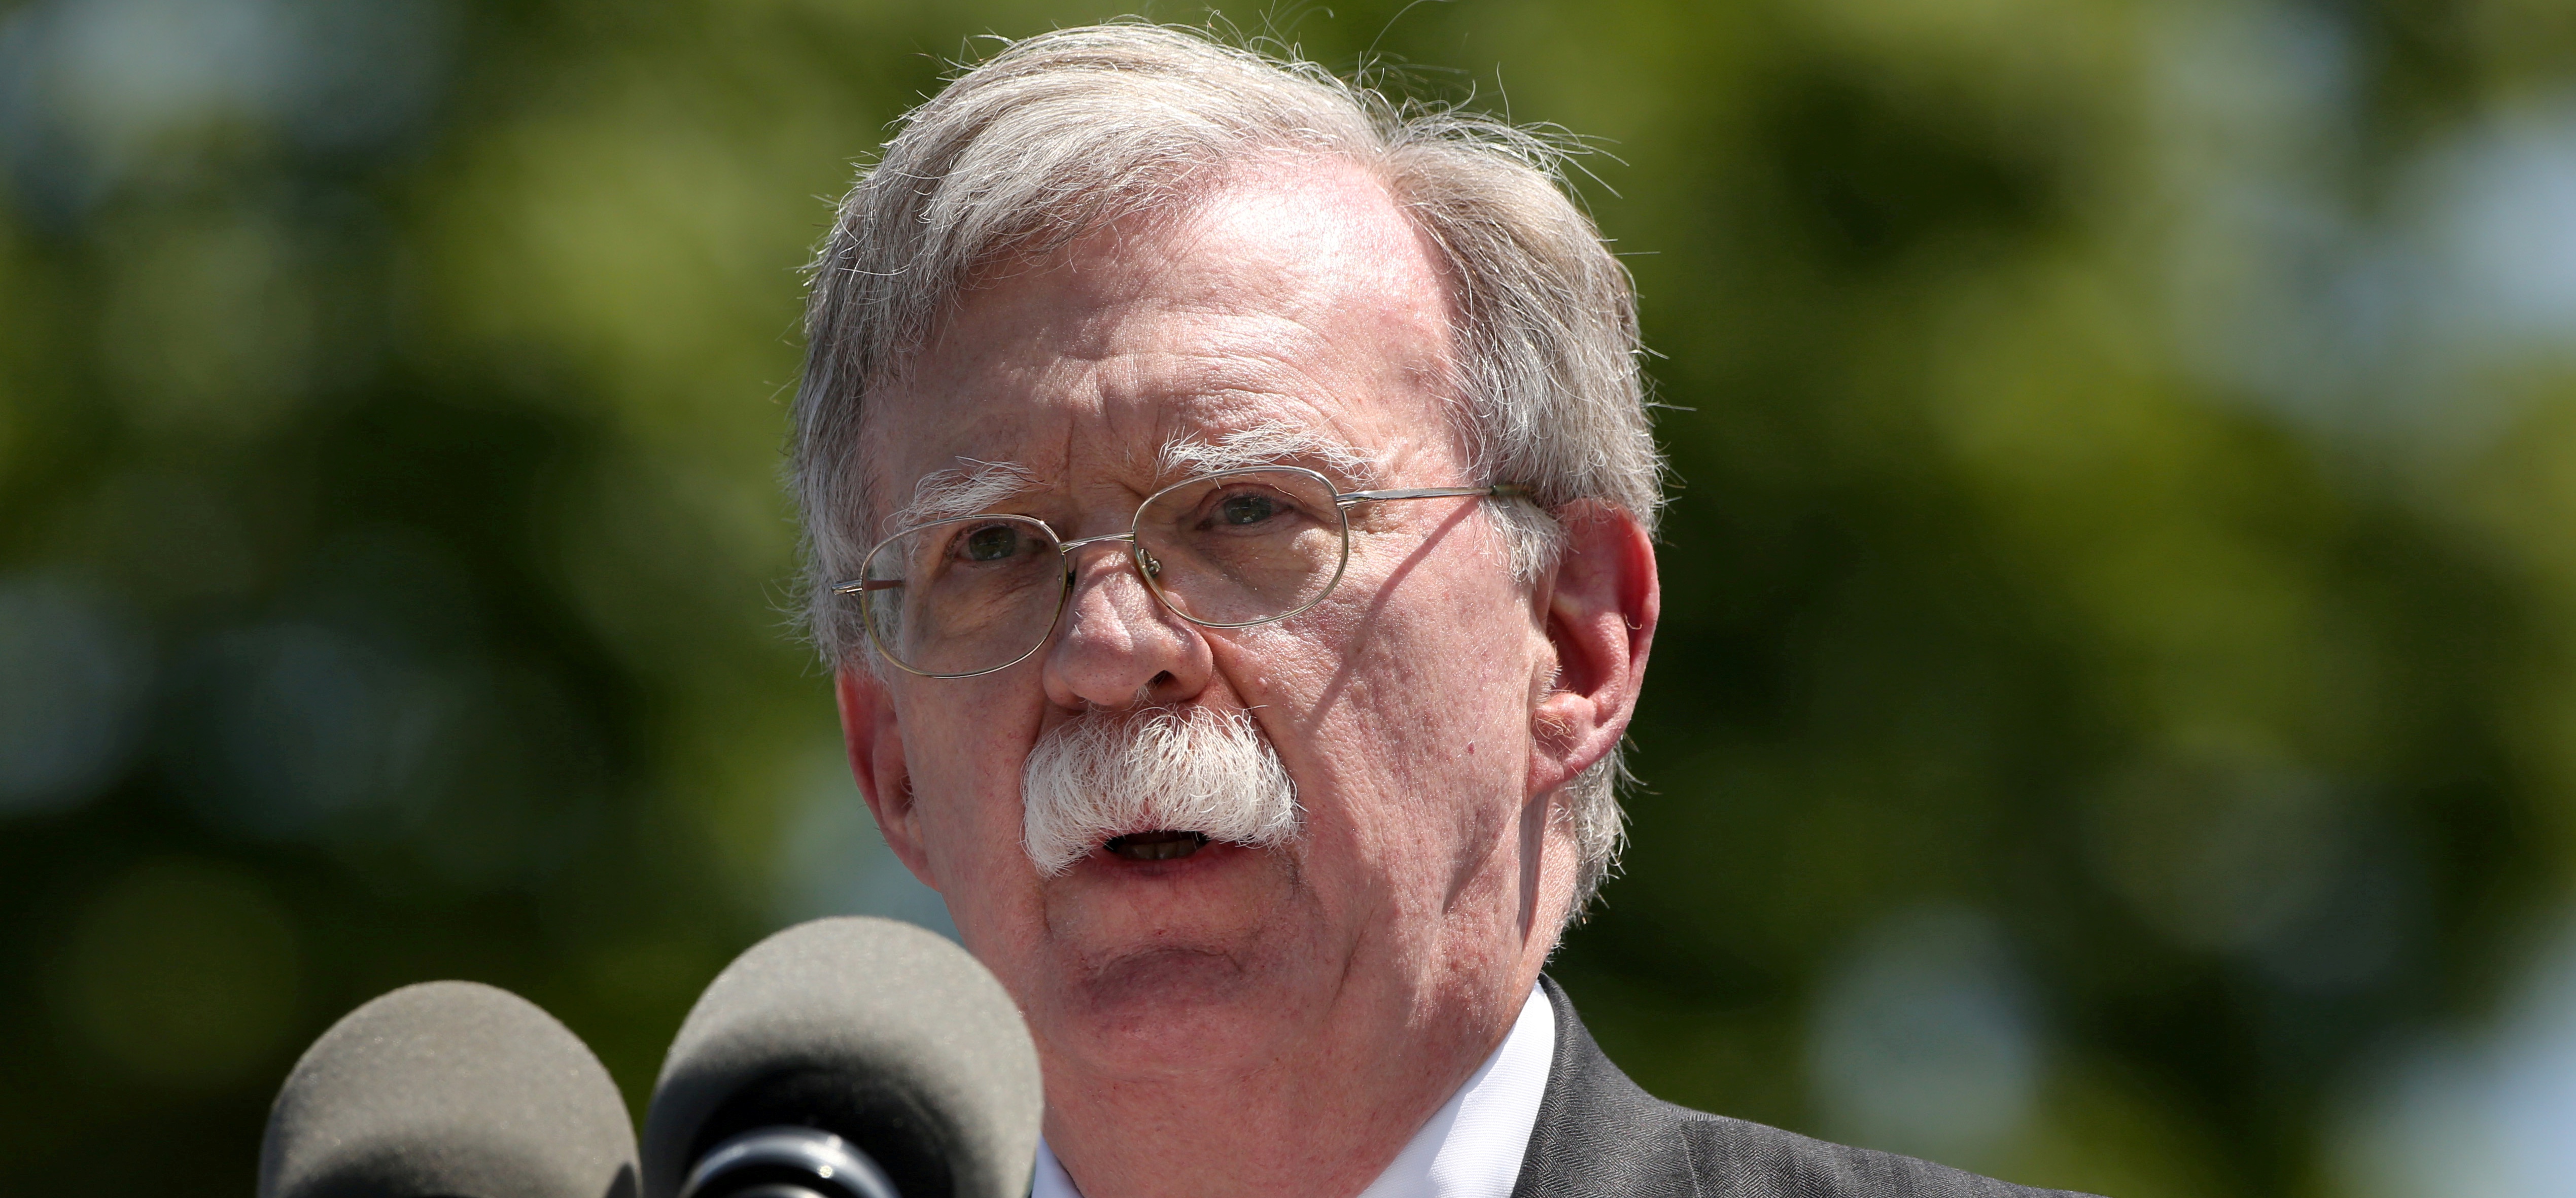 FILE PHOTO: U.S. National Security Advisor John Bolton speaks during a graduation ceremony at the U.S. Coast Guard Academy in New London, Connecticut, U.S., May 22, 2019. REUTERS/Michelle McLoughlin/File Photo